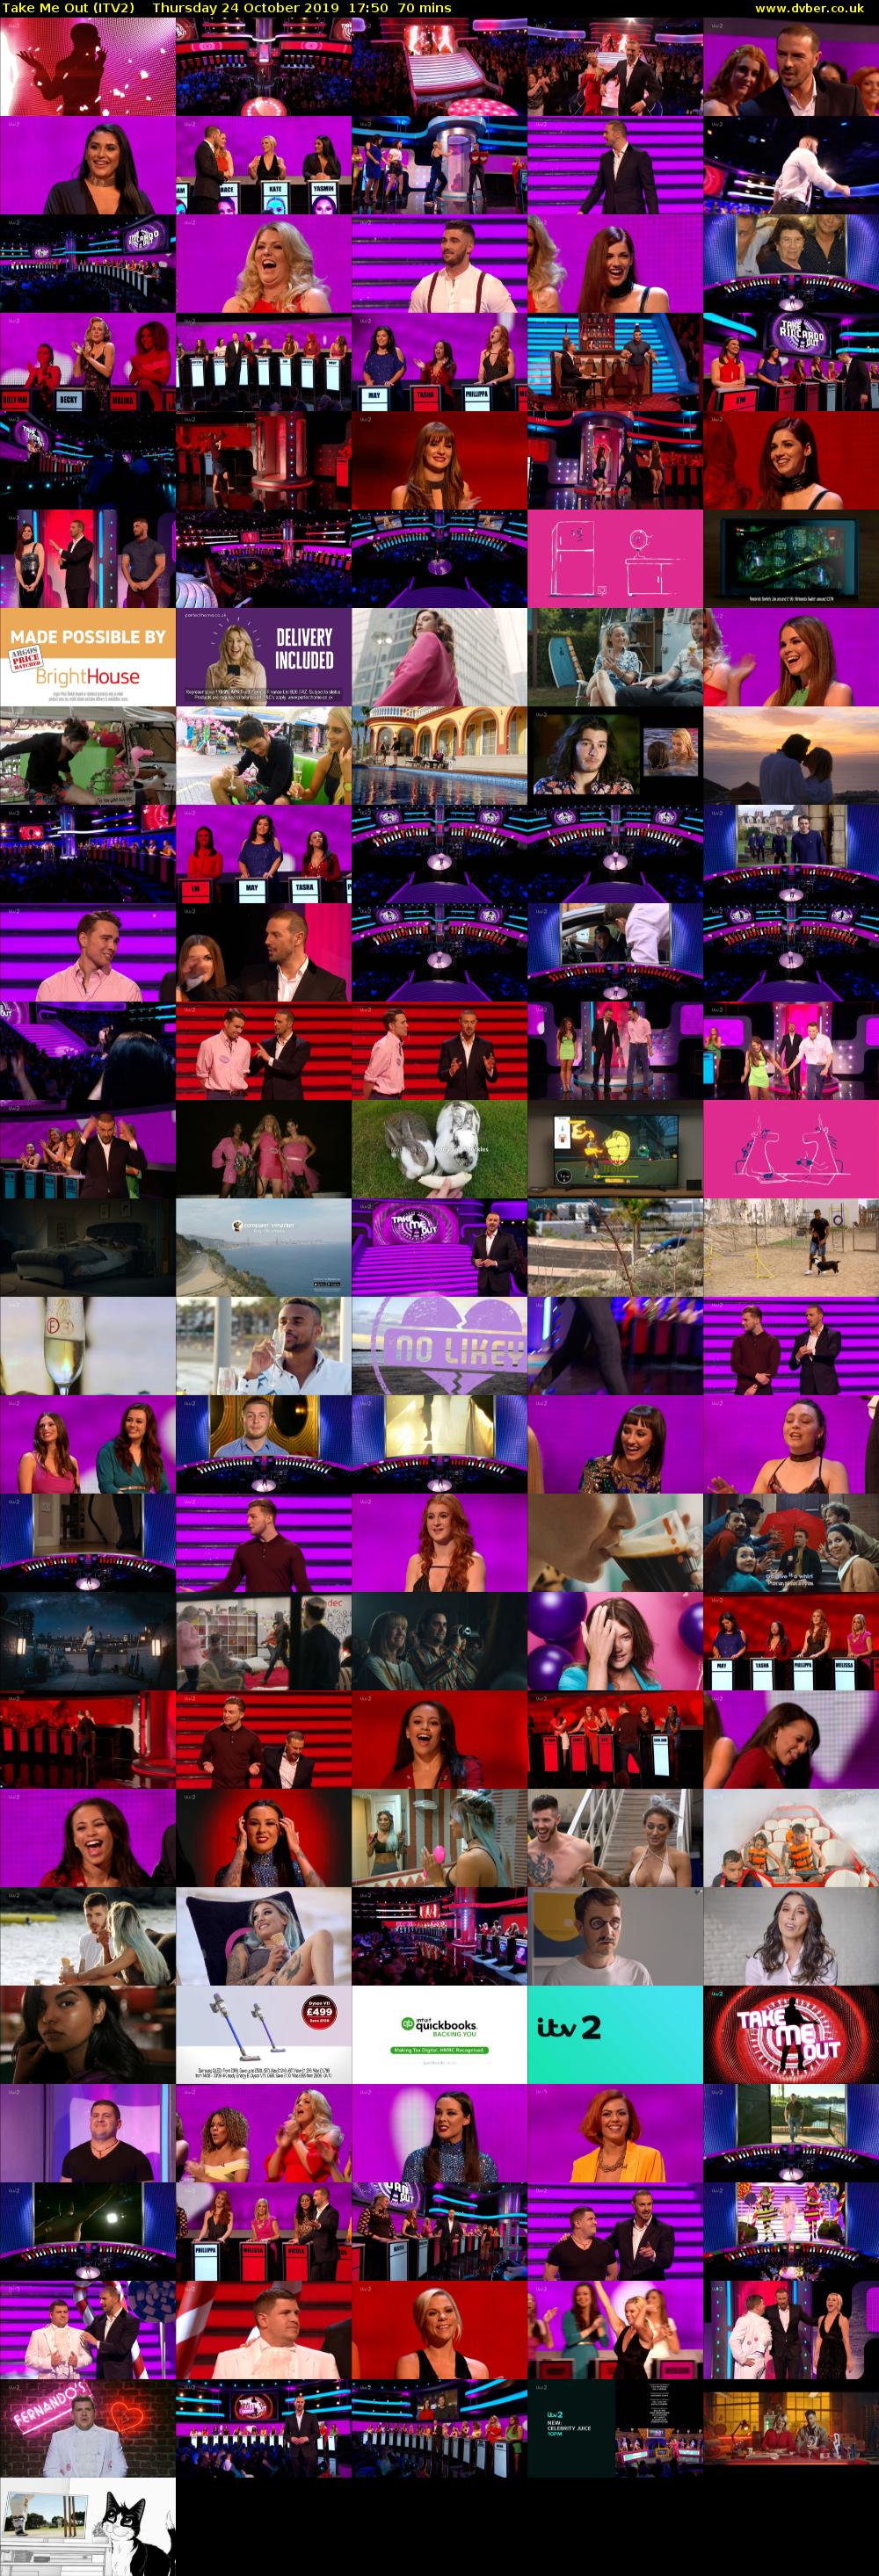 Take Me Out (ITV2) Thursday 24 October 2019 17:50 - 19:00